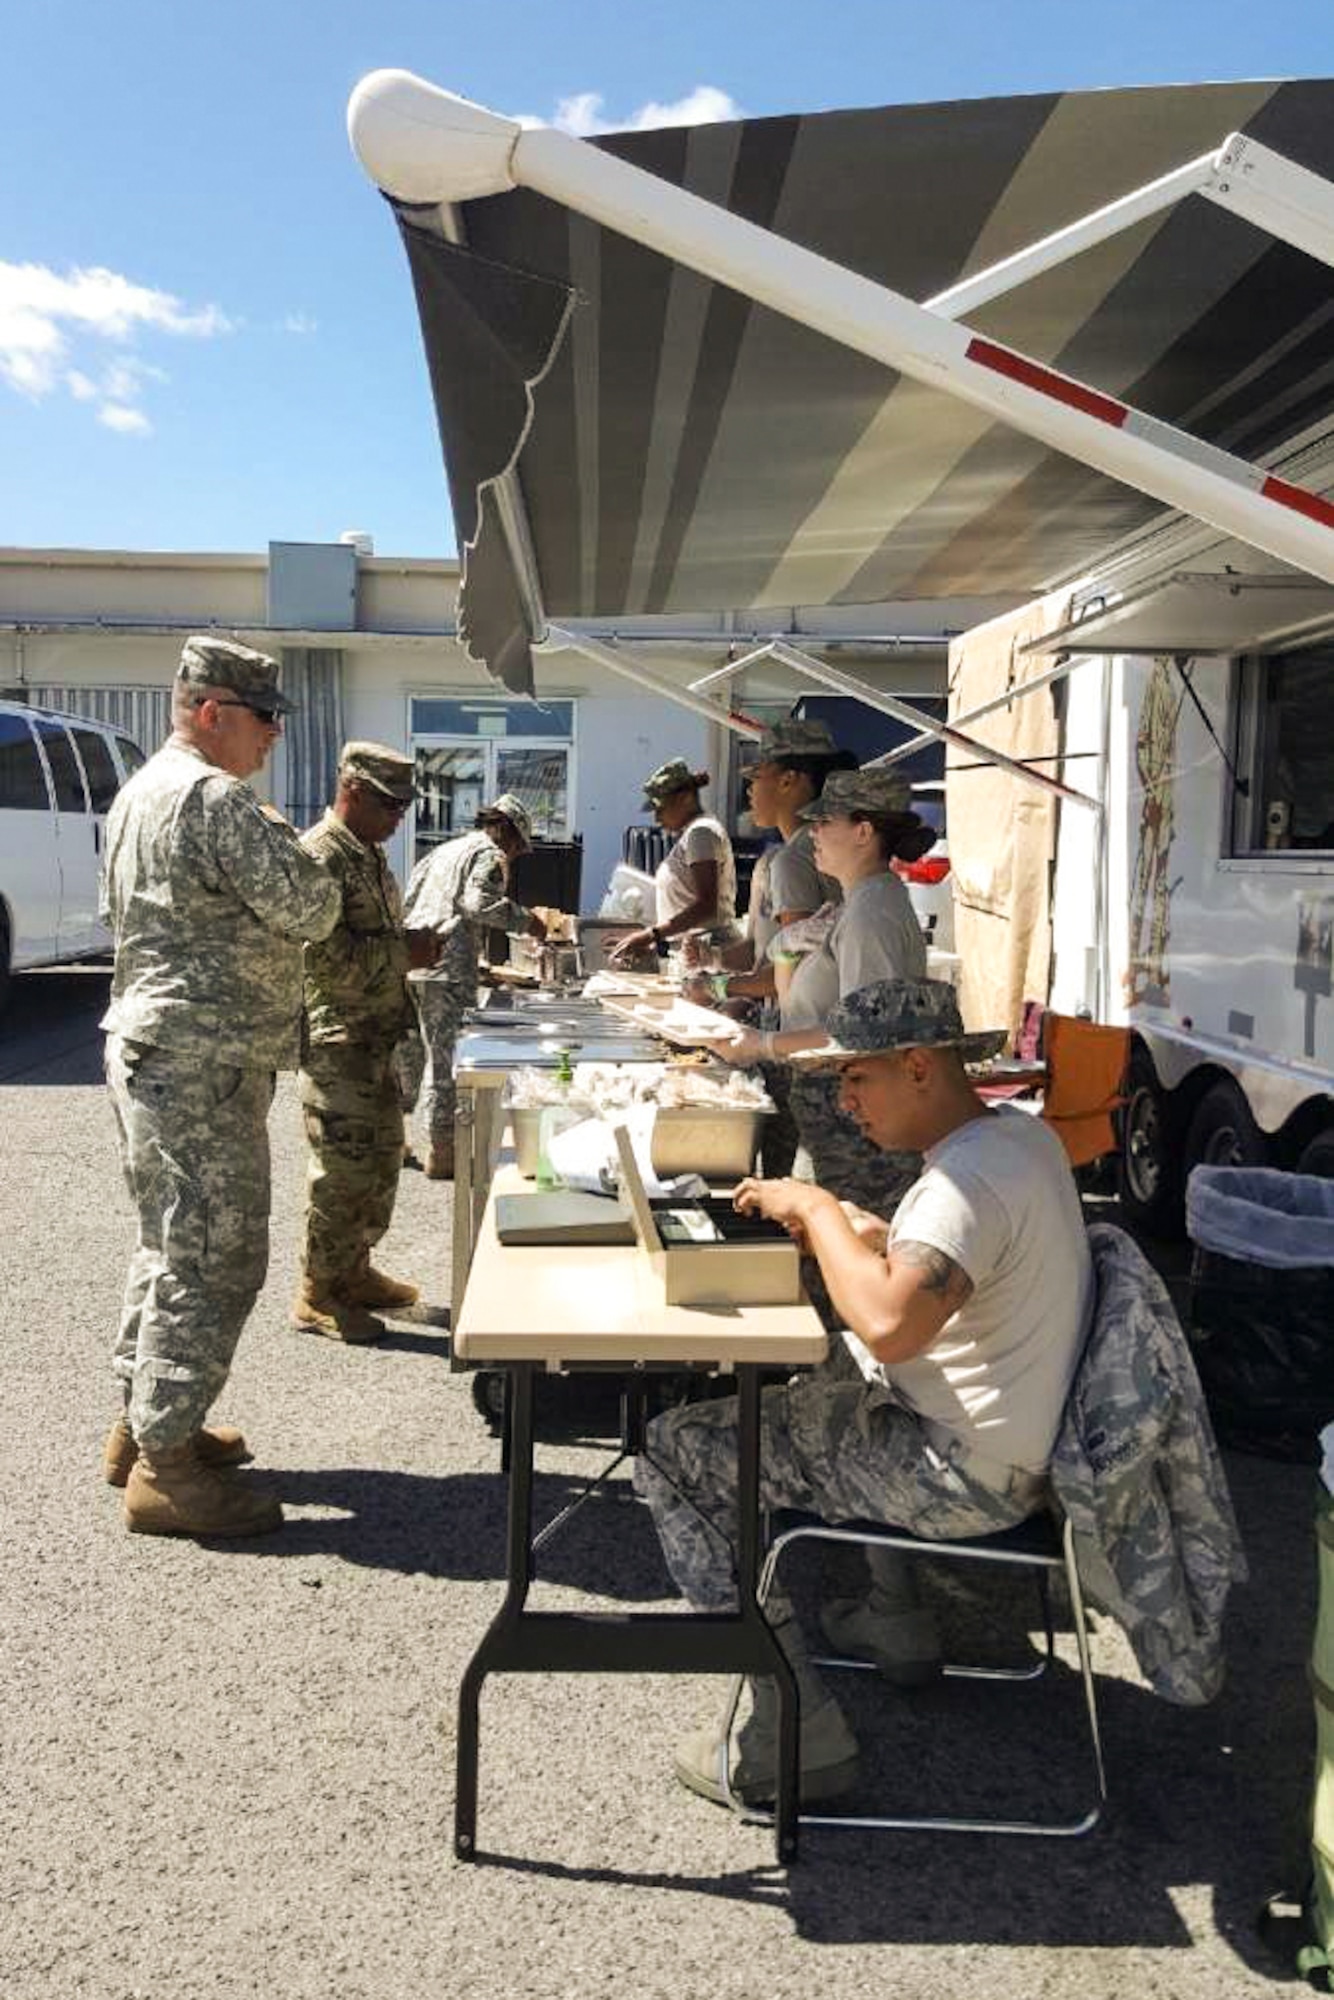 Illinois Air National Guard services specialists serving meals from a Disaster Relief Mobile Kitchen Trailer during a 2017 deployment to Puerto Rico.